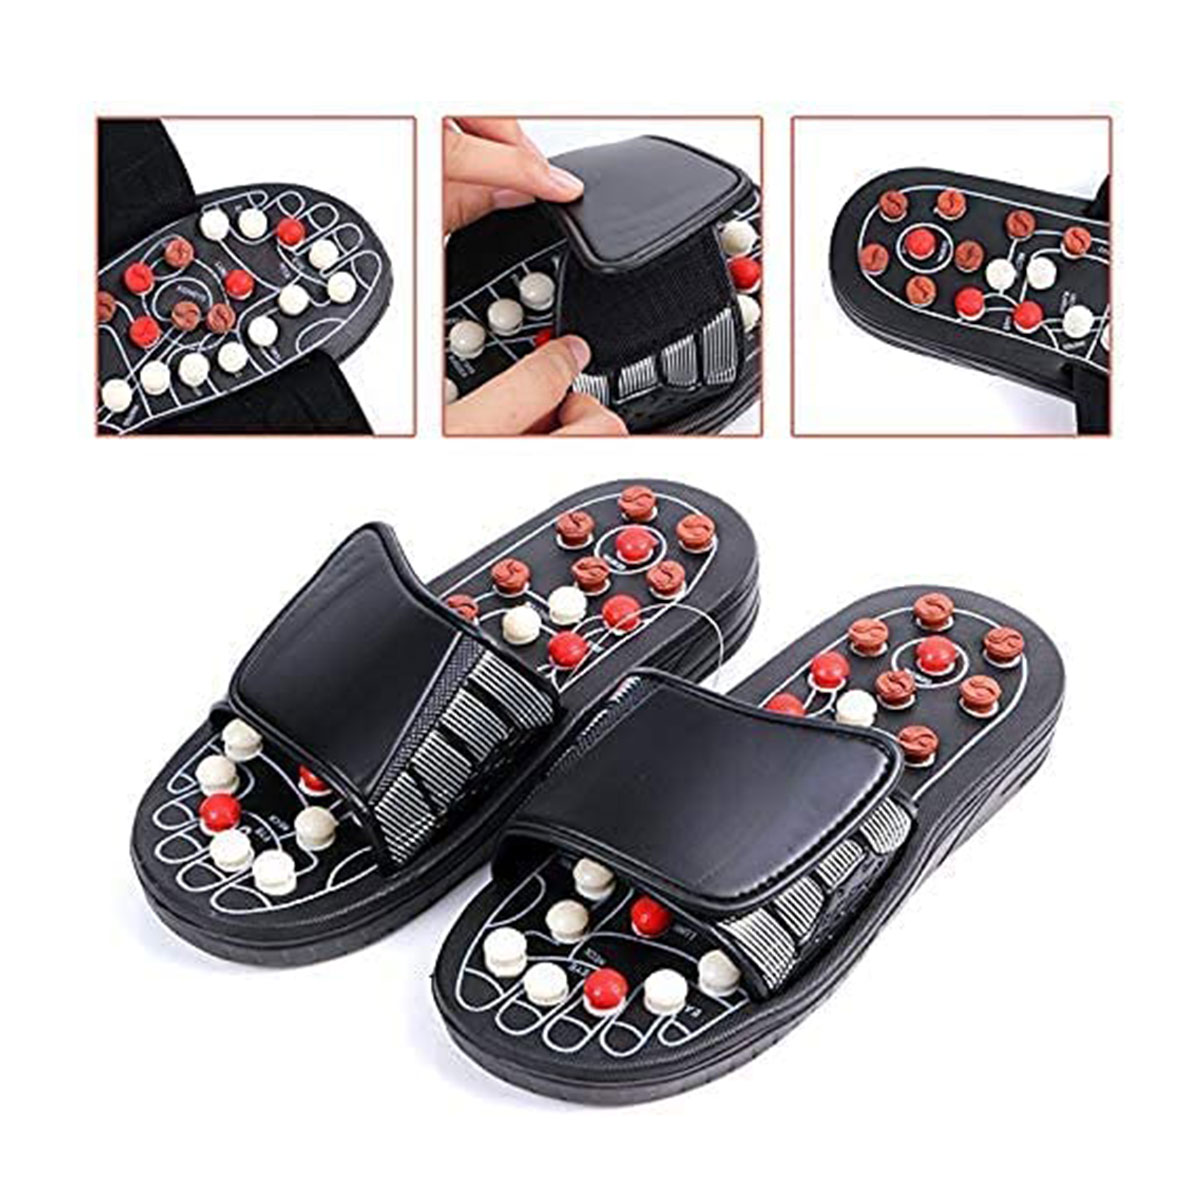 Buy Marshal Fitness Foot Massage Acupuncture Slippers in Dubai, Abu ...